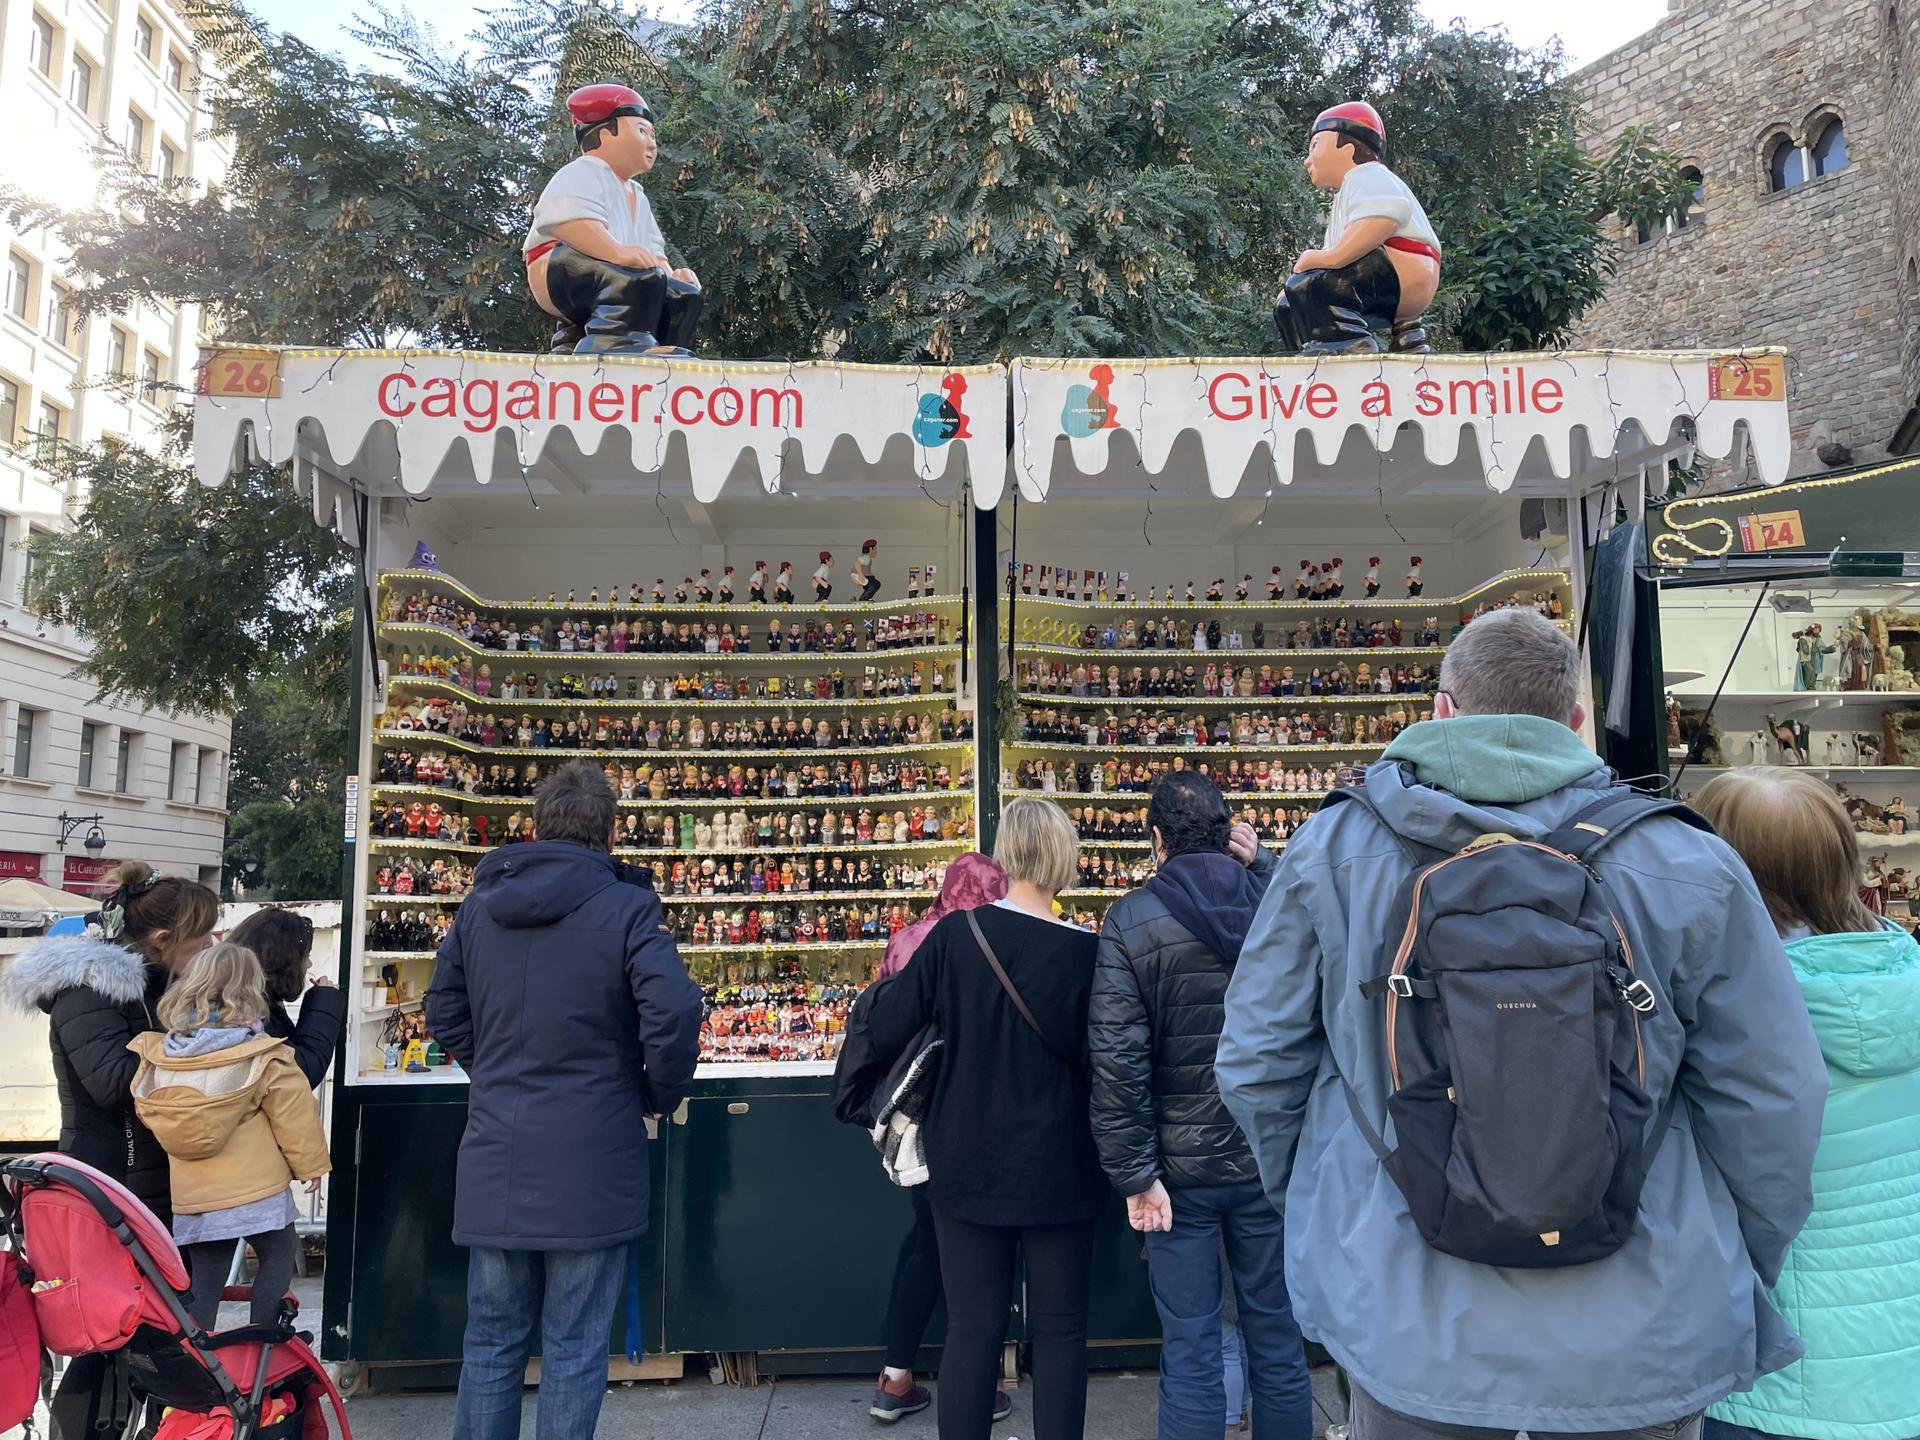 At Barcelona's oldest Christmas market, Fira de Santa Llúcia, Marc Alós sells handmade Caganers. His company, founded by his mother in 1992, now has more than 500 versions of the Caganer.